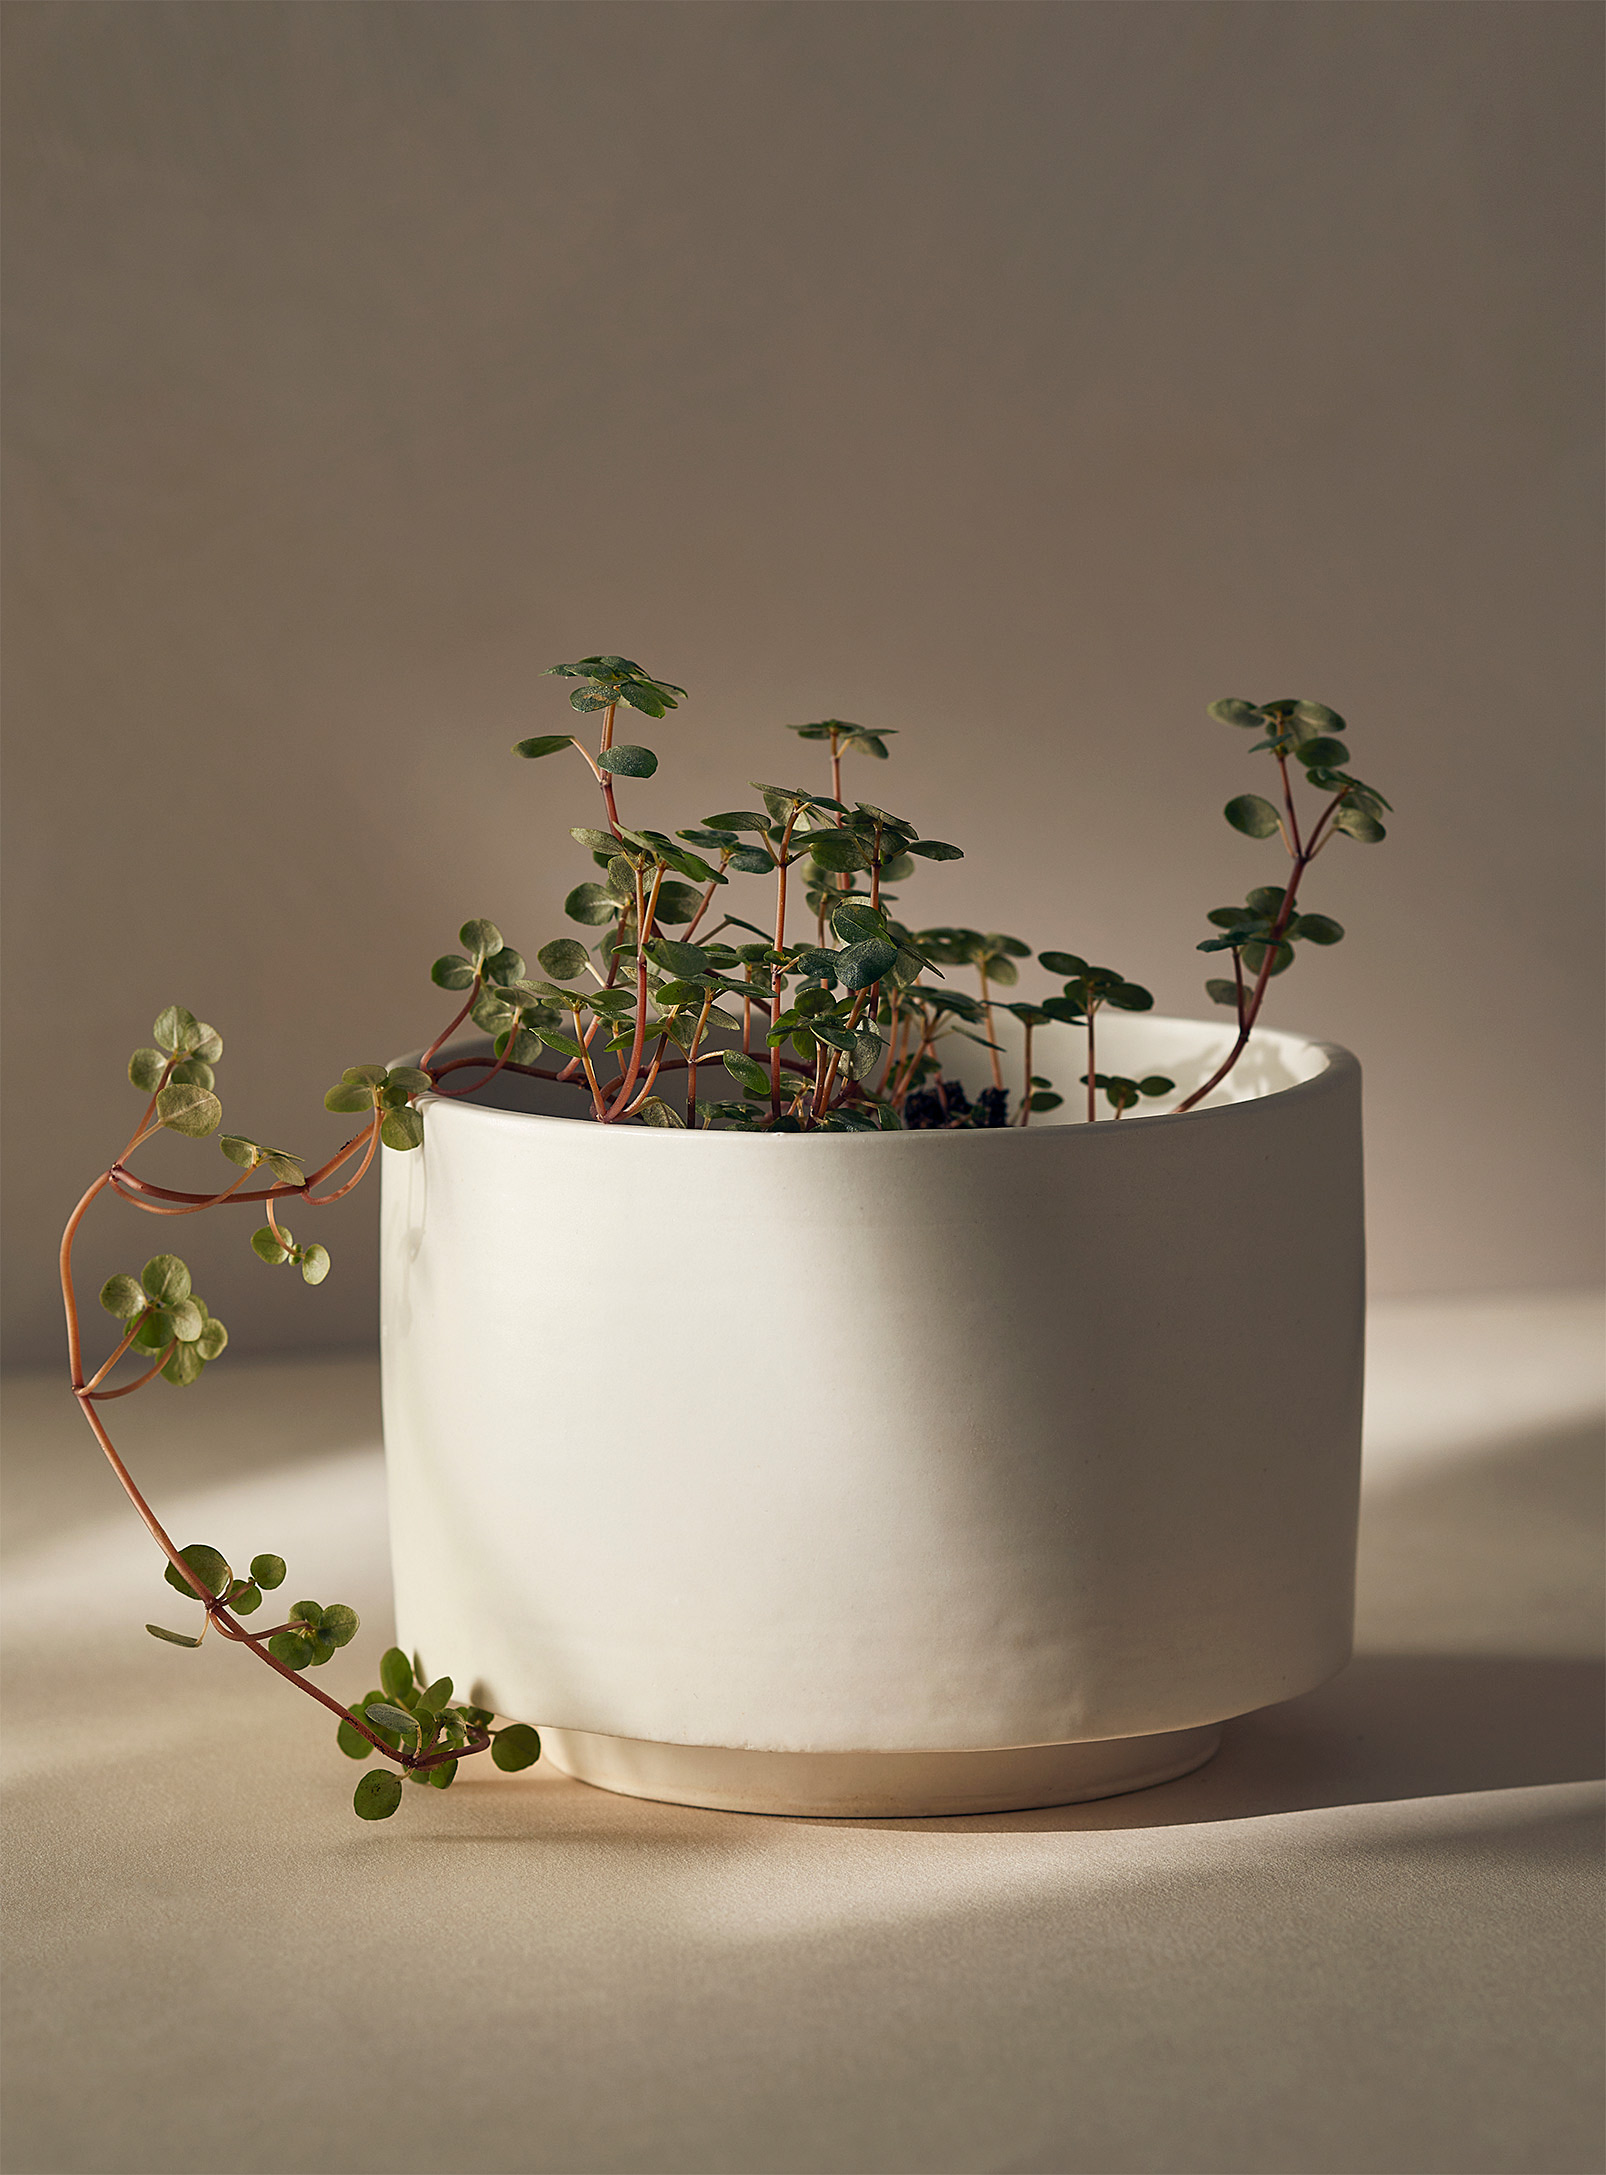 Ceramics by LJM - Invisible saucer minimalist stoneware planter 4 at the opening